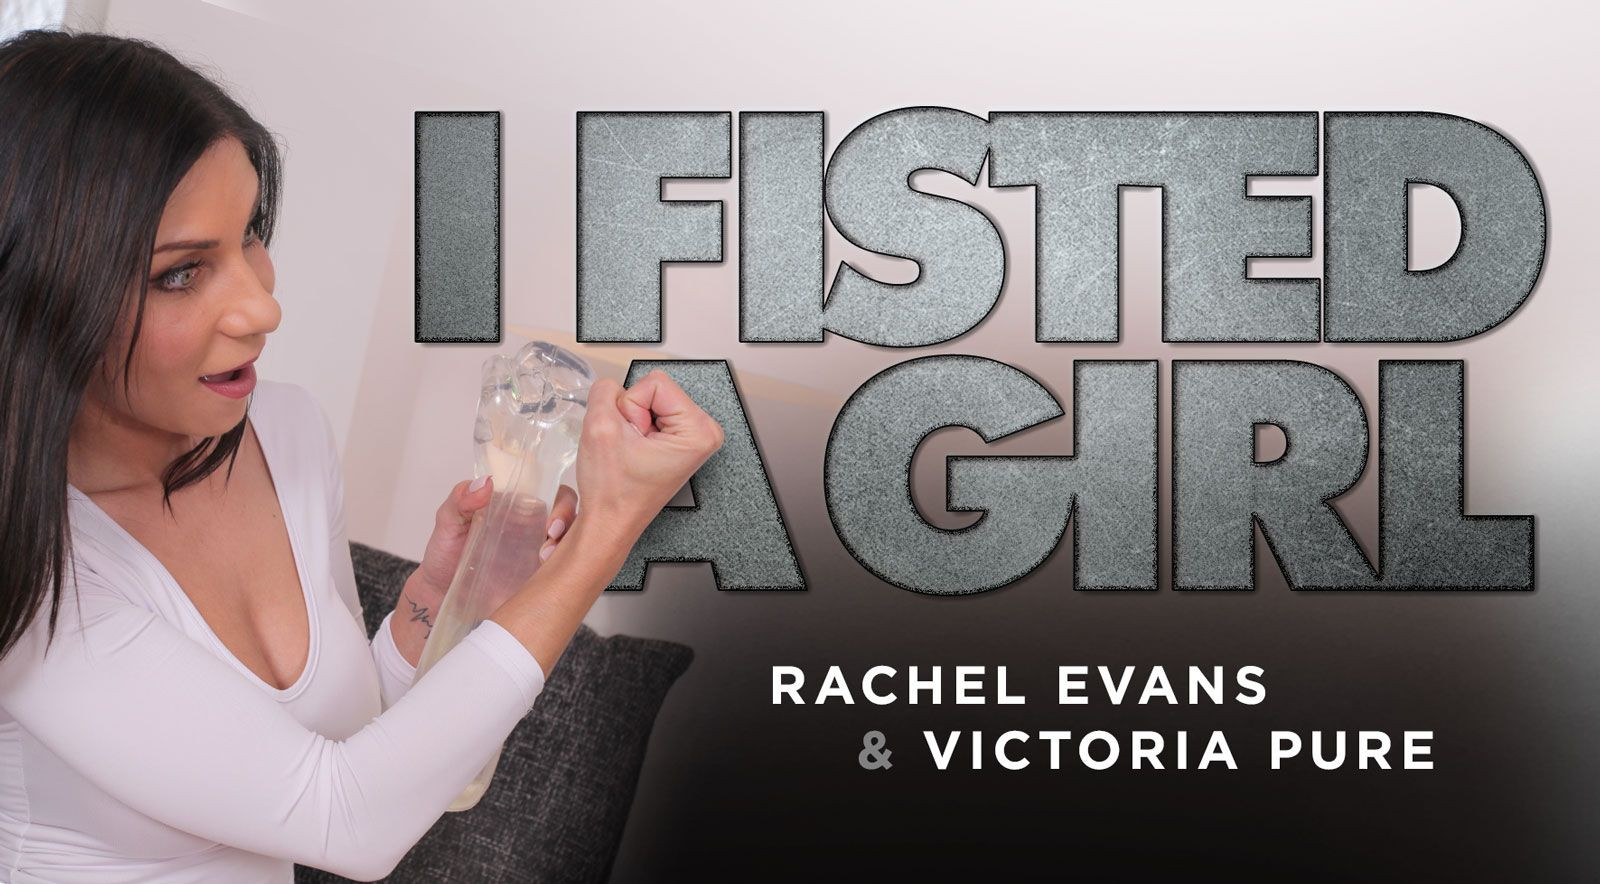 I Fisted A Girl: Rachel Evans, Victoria Pure Slideshow